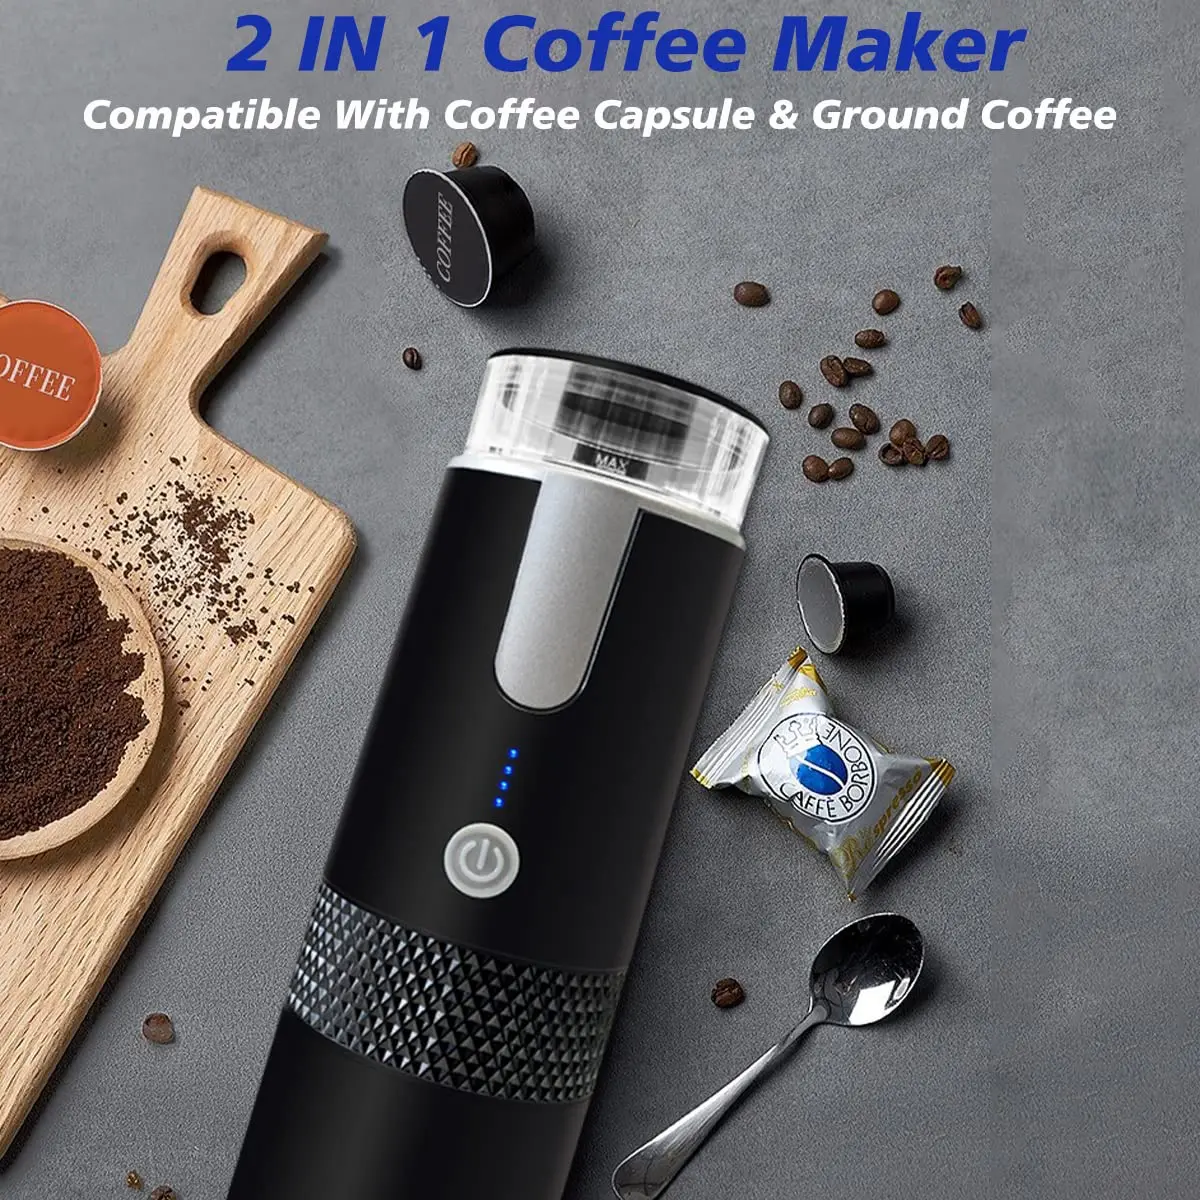 https://ae01.alicdn.com/kf/S0a8d2ae65cf249a6bed67eced331257dC/Wireless-Portable-Coffee-Machine-Rechargeable-Extraction-Coffee-Maker-for-Coffee-Powder-Capsule-Outdoor-Mini-Car-Coffee.jpg